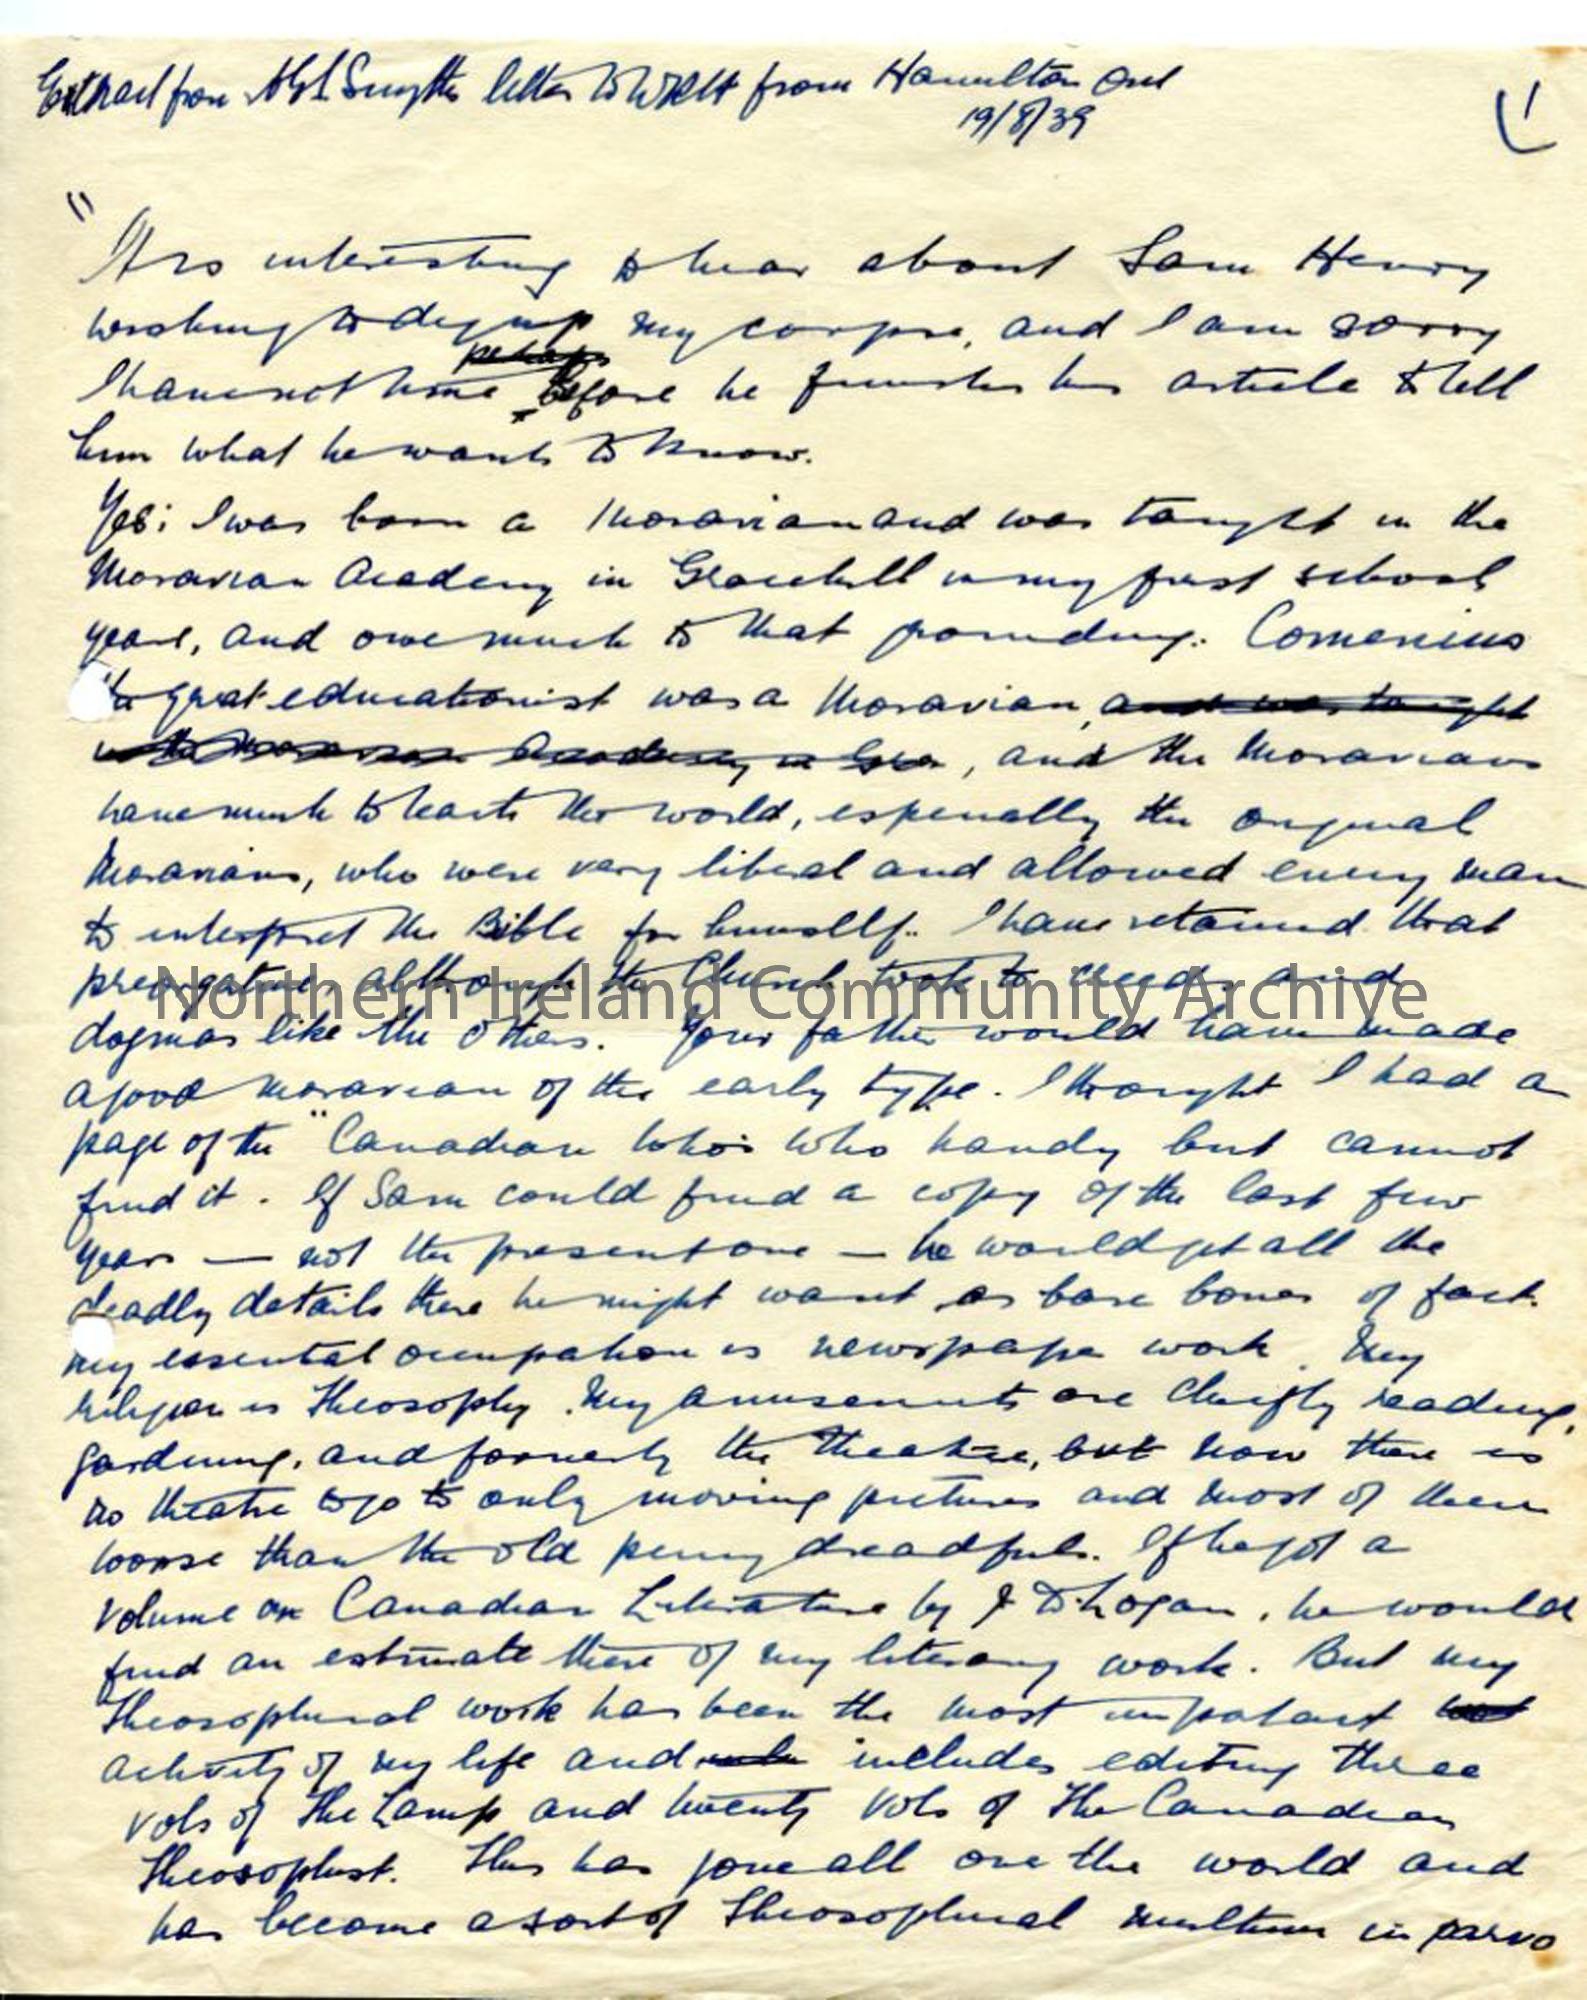 Handwritten extract from letter